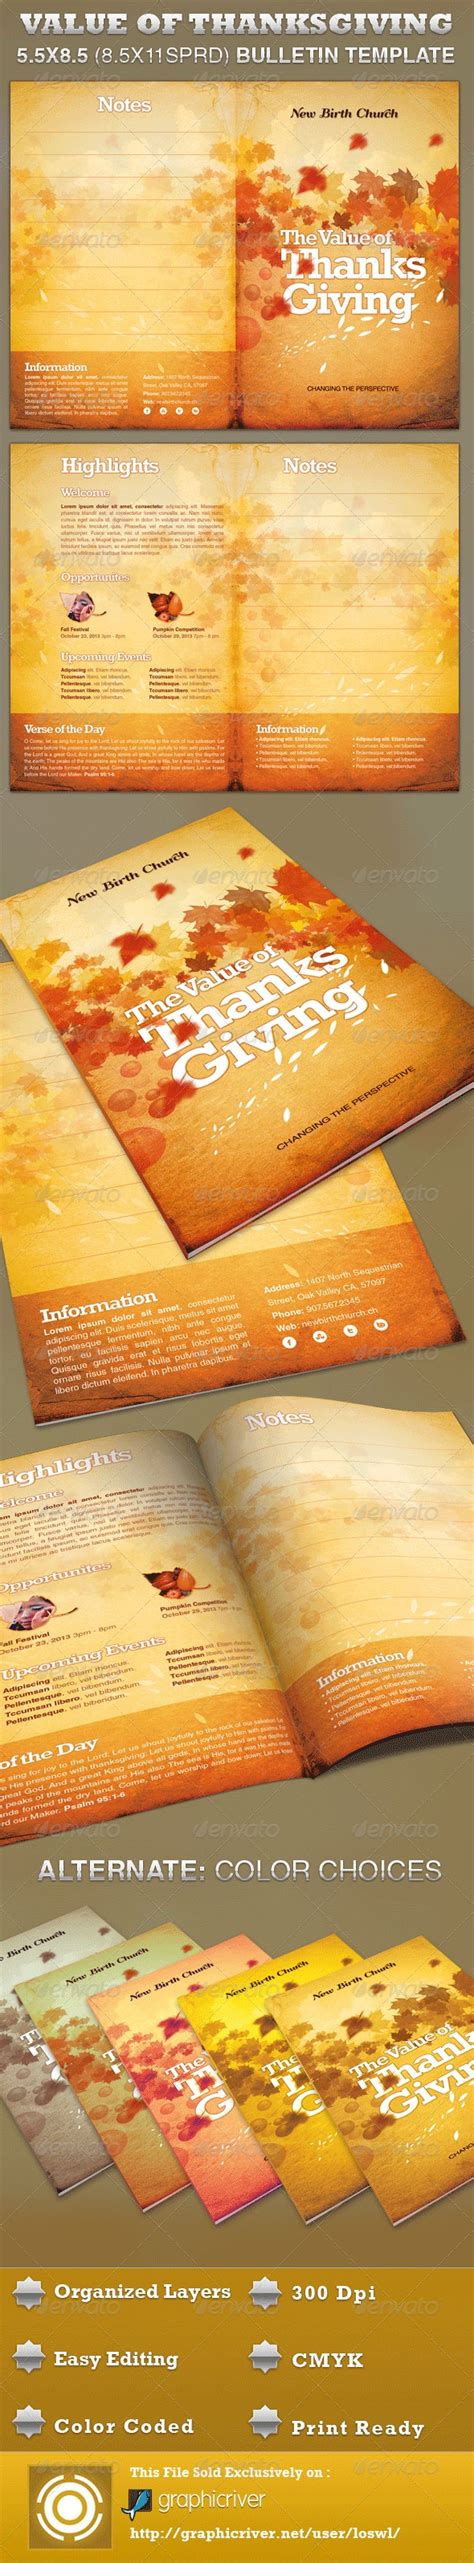 The Value of Thanksgiving Church Bulletin Template, Print Templates